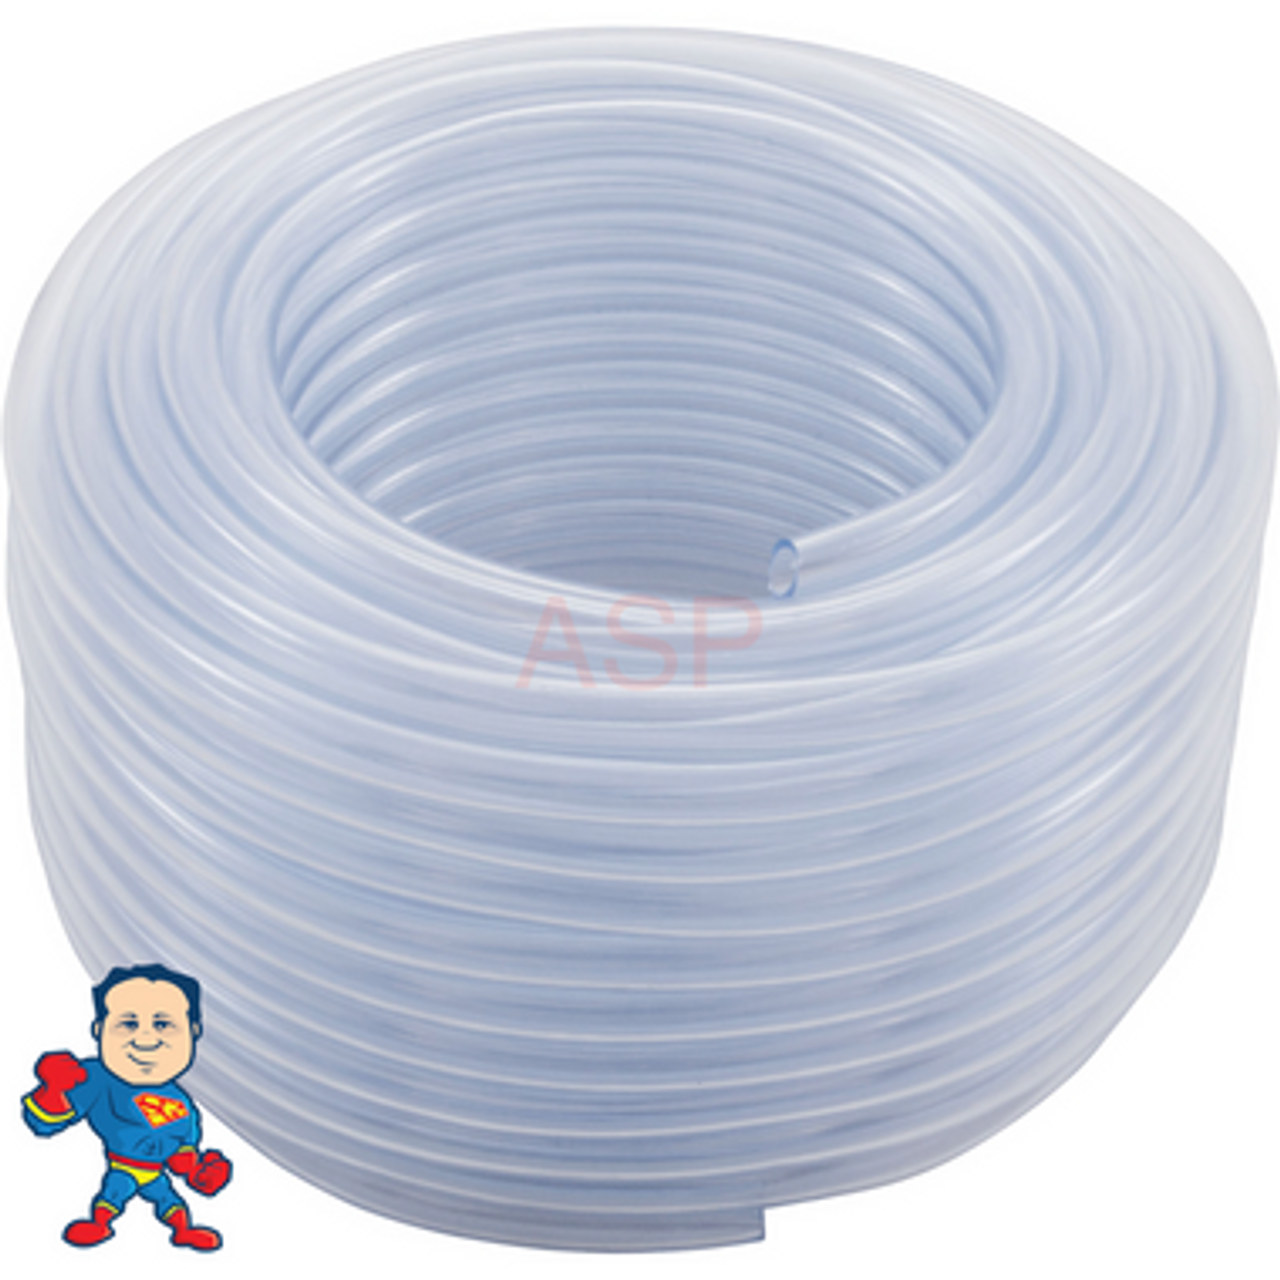 Air or Water Tubing, Vinyl, 3/8" id x 1/2"od, 50ft Roll